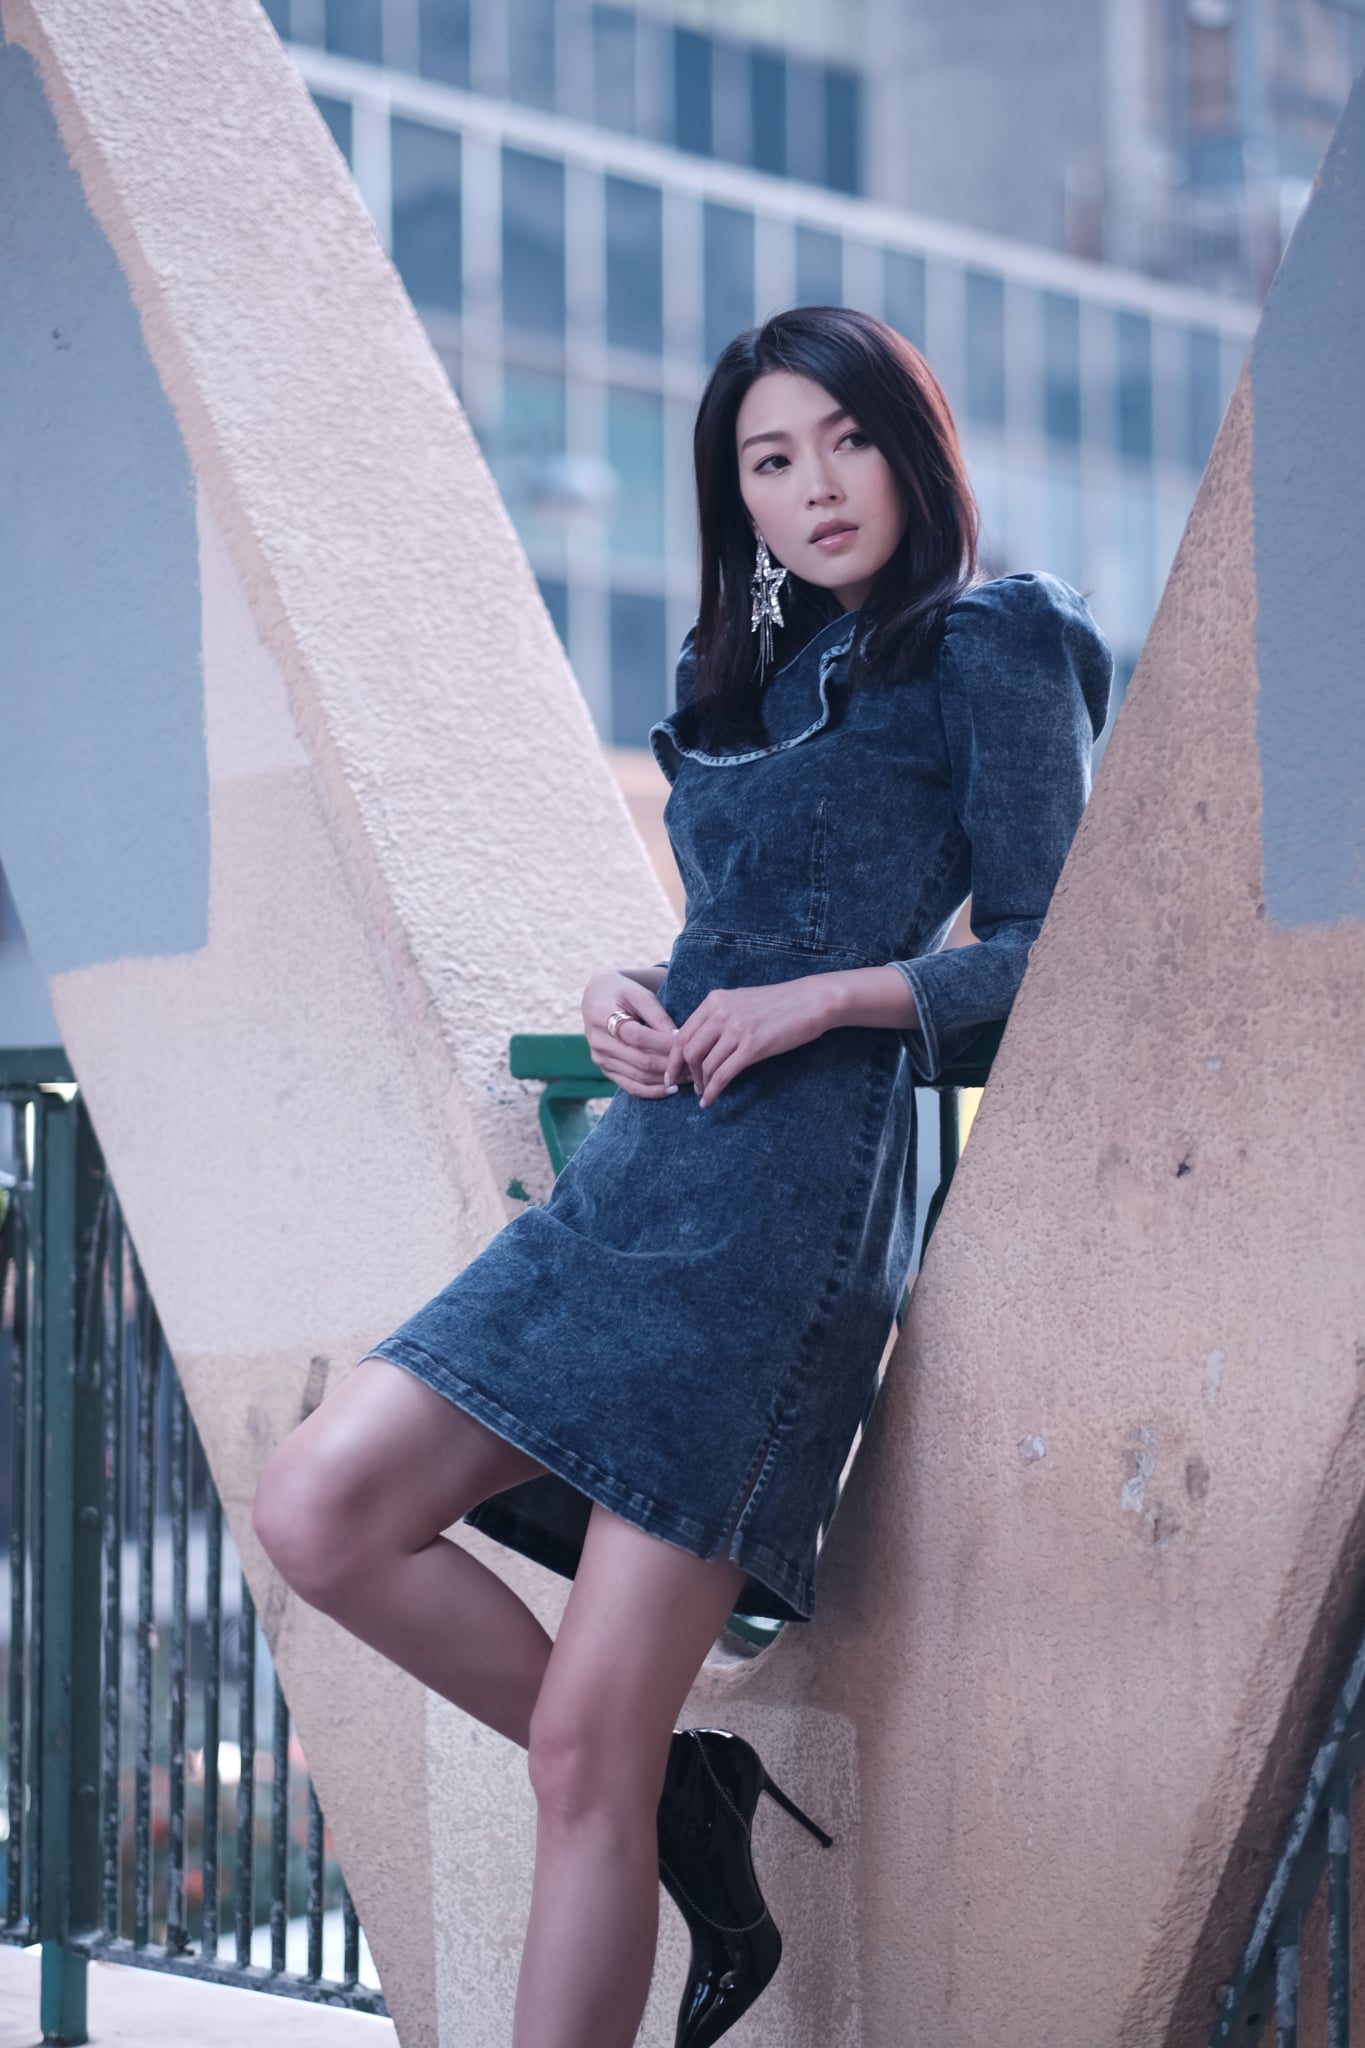 #VTCelebs | @Shiga Lin 連詩雅 immersed in the musical mood of reminiscence in #VivienneTam #Ruyi Denim Grey Cotton Dress, with ruffle feature that combines softness with strength, inspired by the new romantics of the 1970s.  #VTFW20 #Shiga